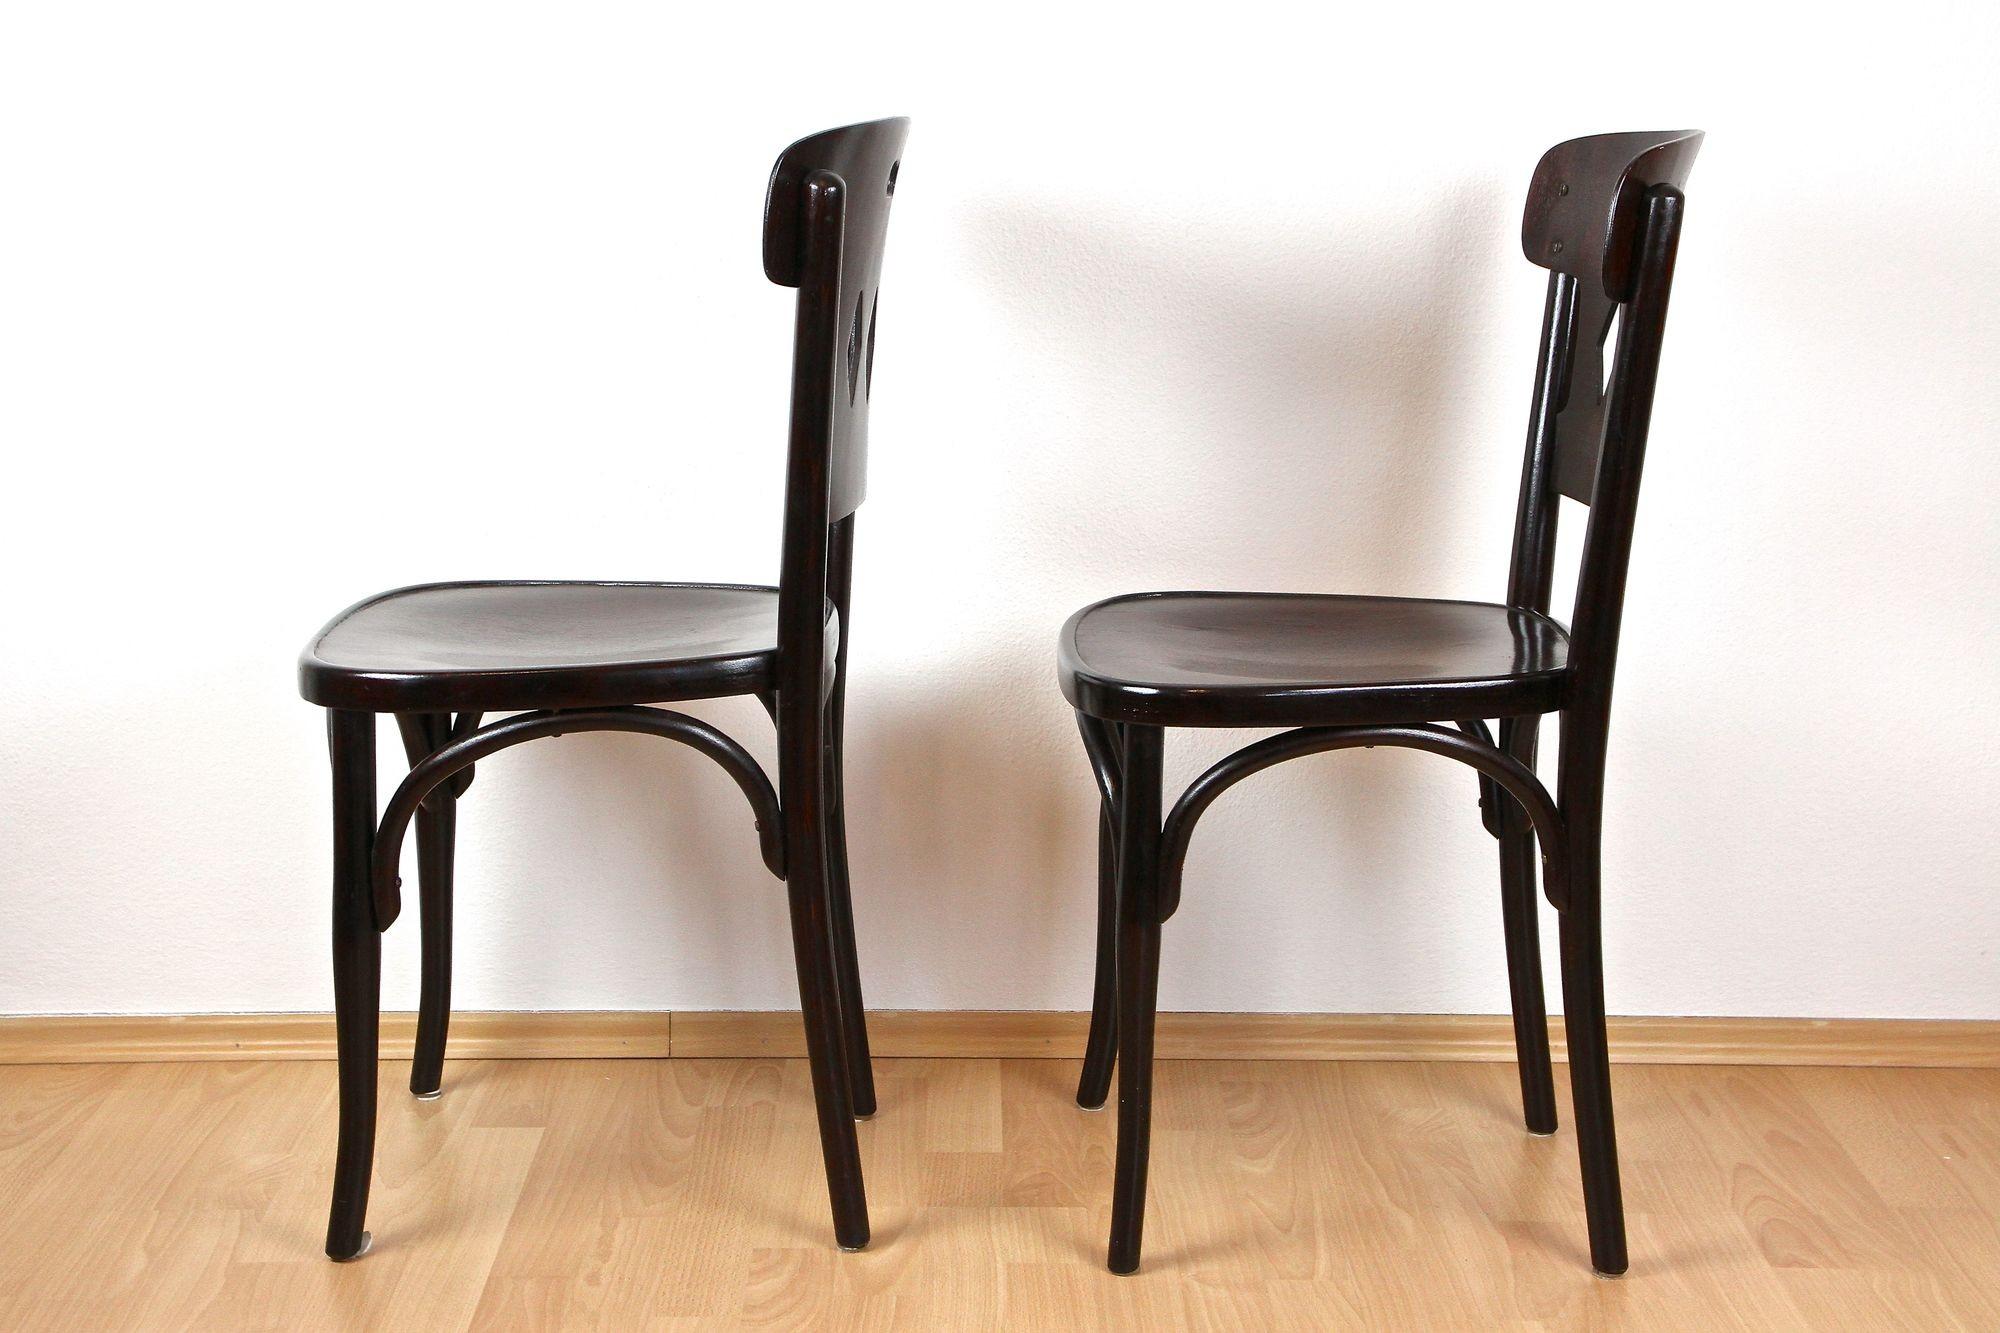 Pair Of Art Nouveau Bentwood Chairs by J&J Kohn, Vienna ca. 1910 For Sale 1